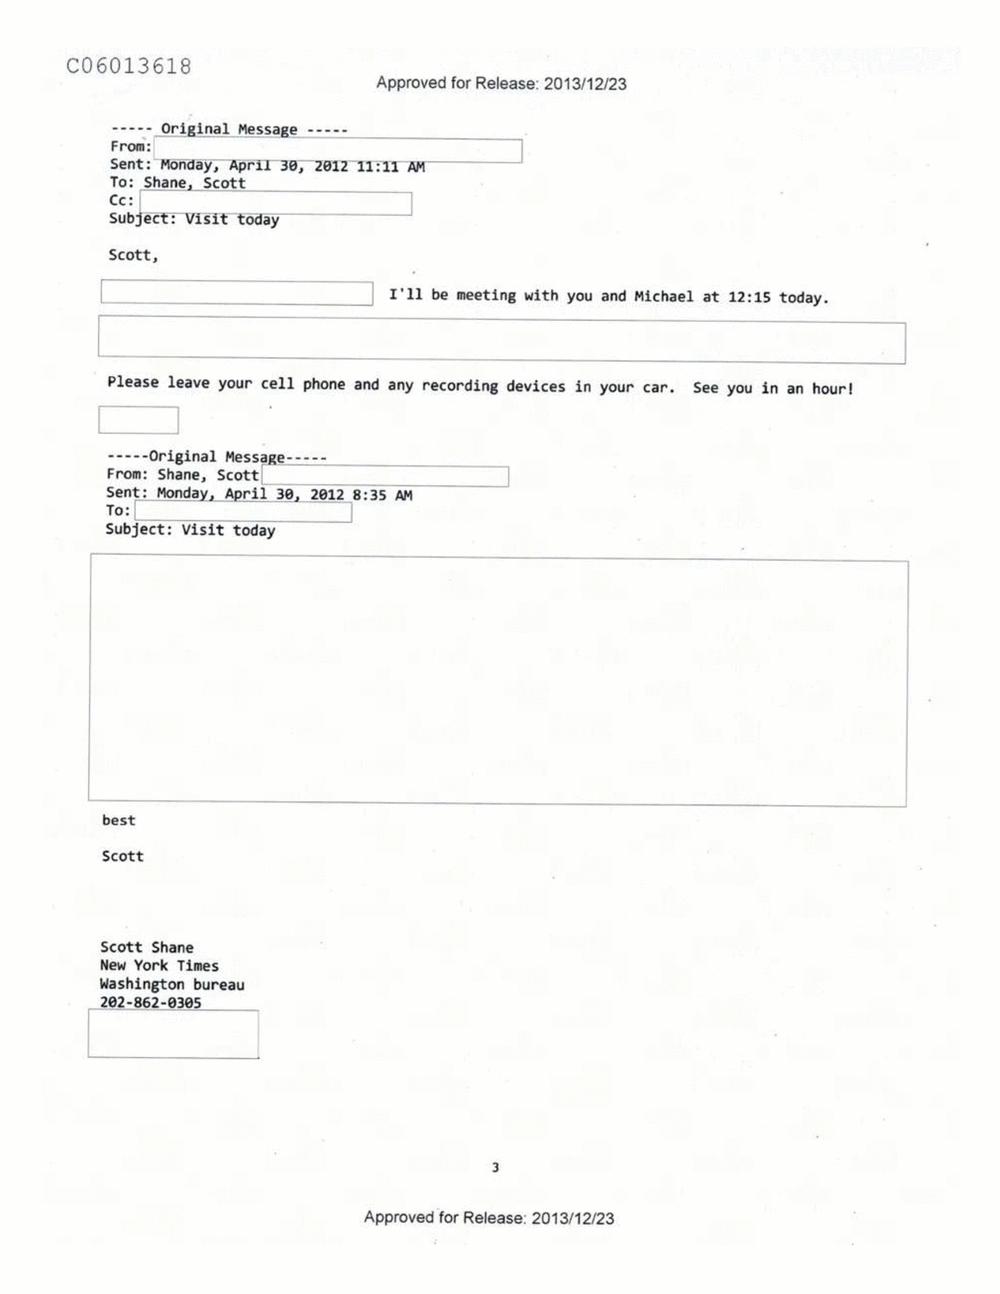 Page 450 from Email Correspondence Between Reporters and CIA Flacks